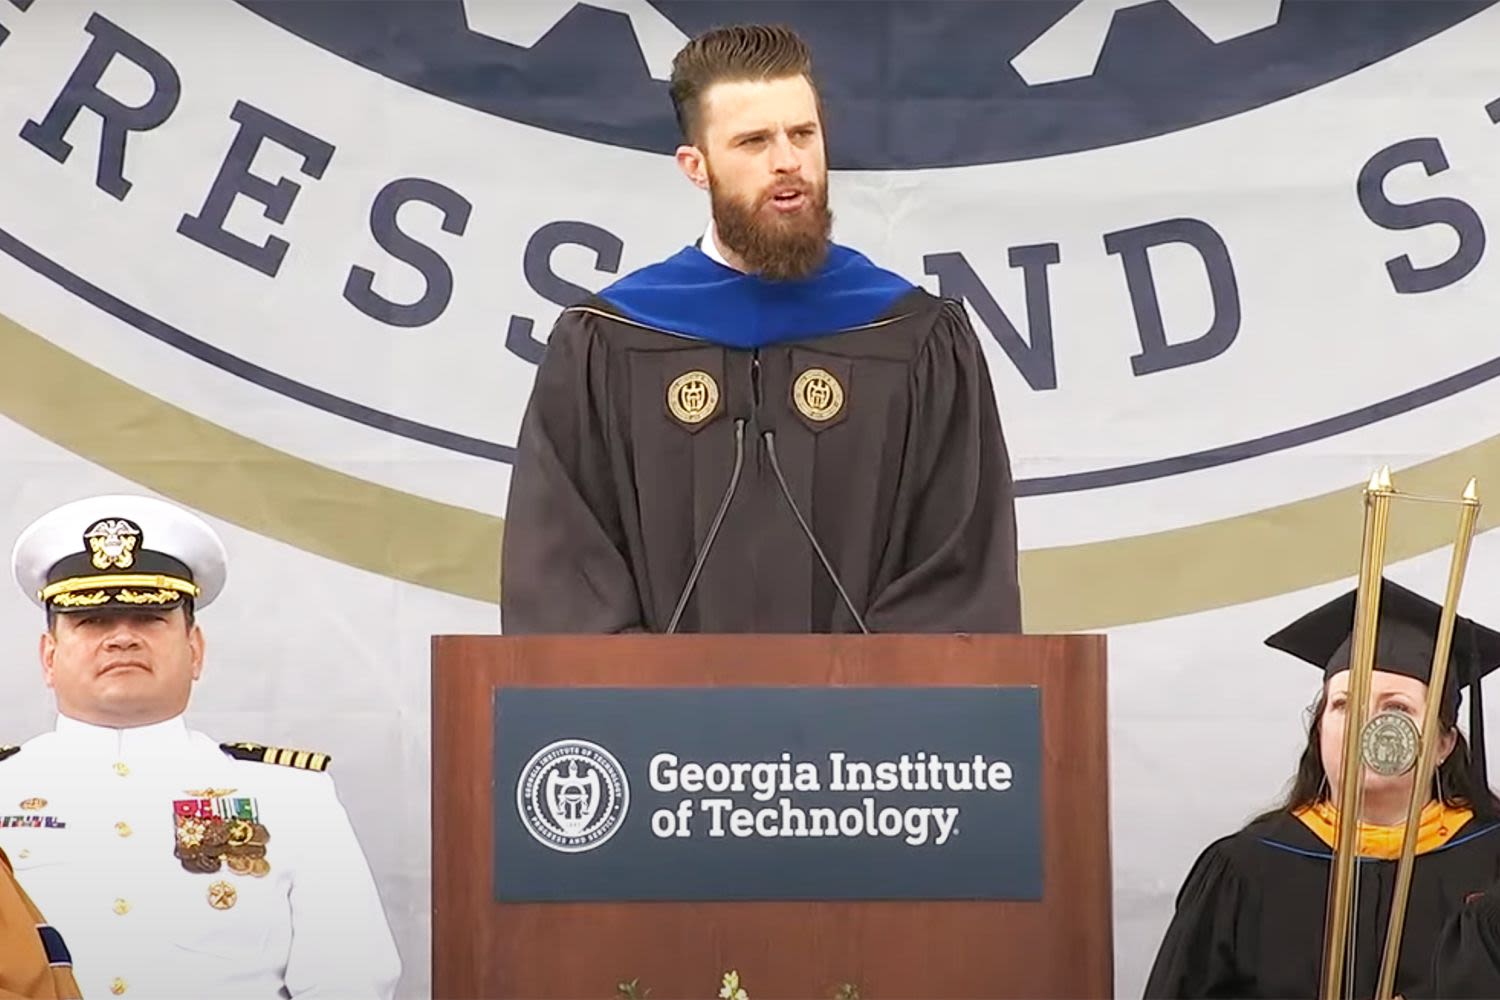 Harrison Butker Urged Graduates to 'Get Married and Start a Family' During Georgia Tech Speech Last Year